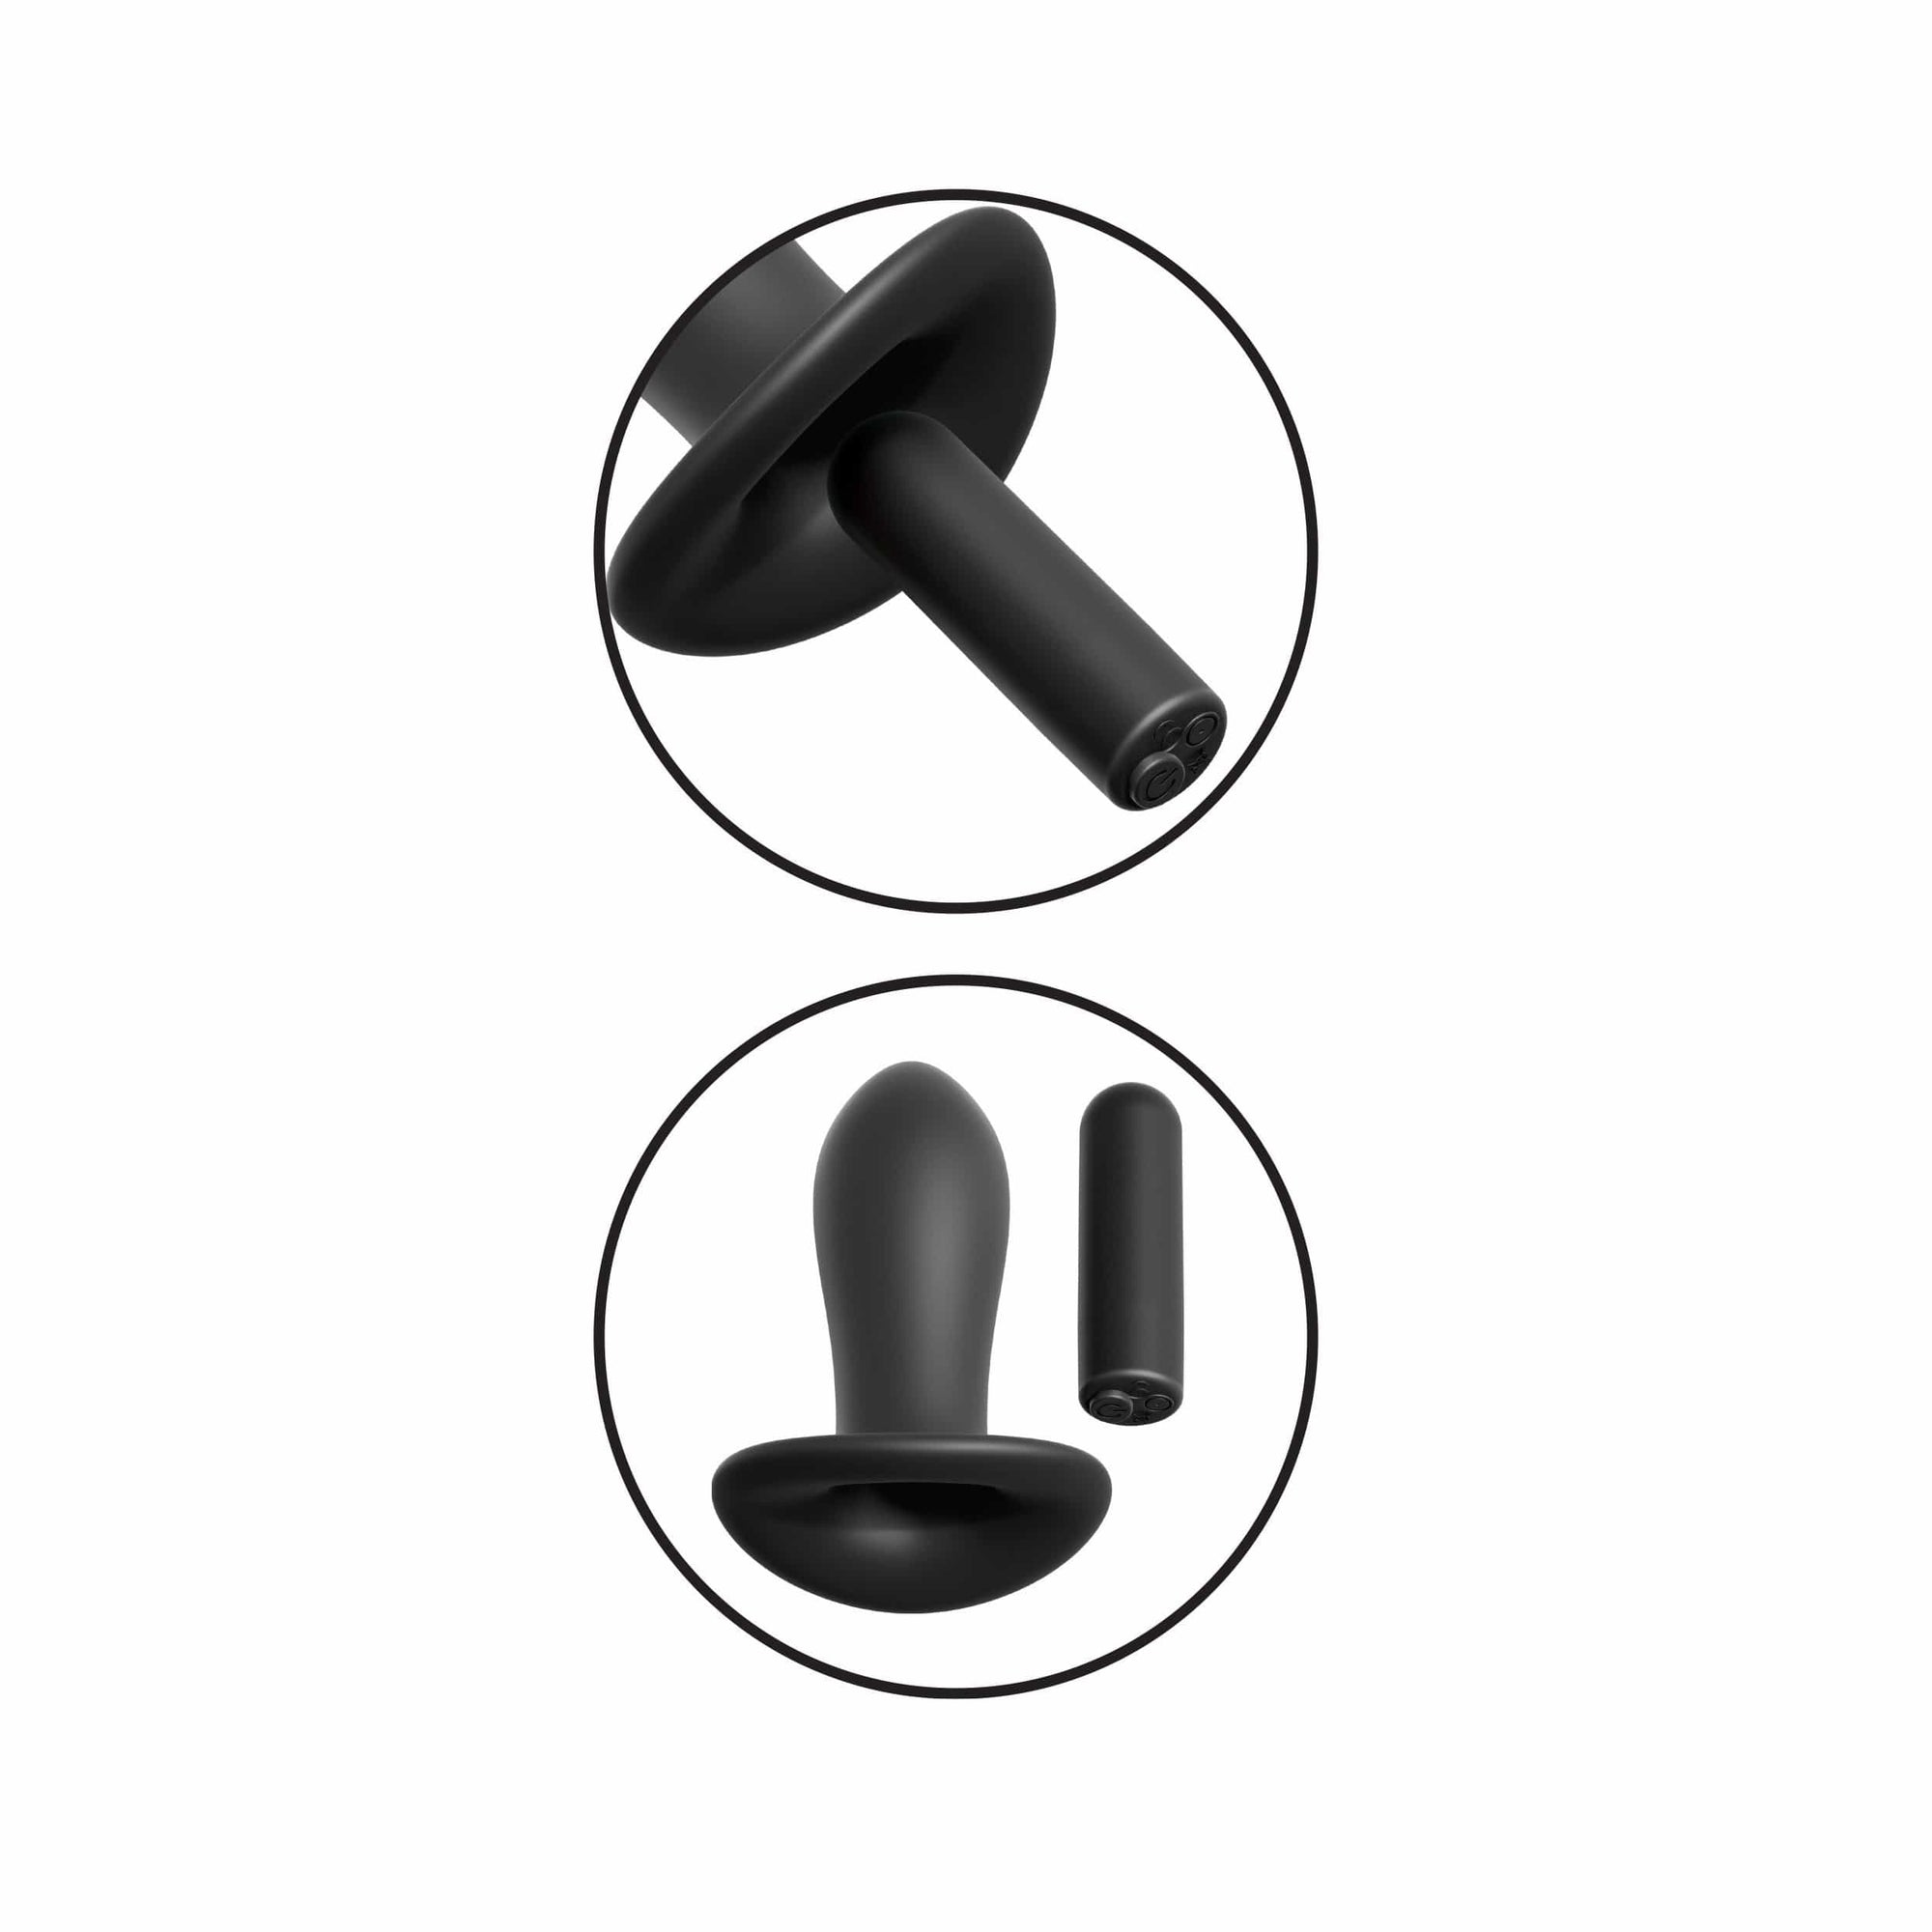 Pipedream - Fetish Fantasy Series 10 Function Remote Fantasy Panty (Black) Panties Massager Remote Control (Vibration) Rechargeable 324161137 CherryAffairs